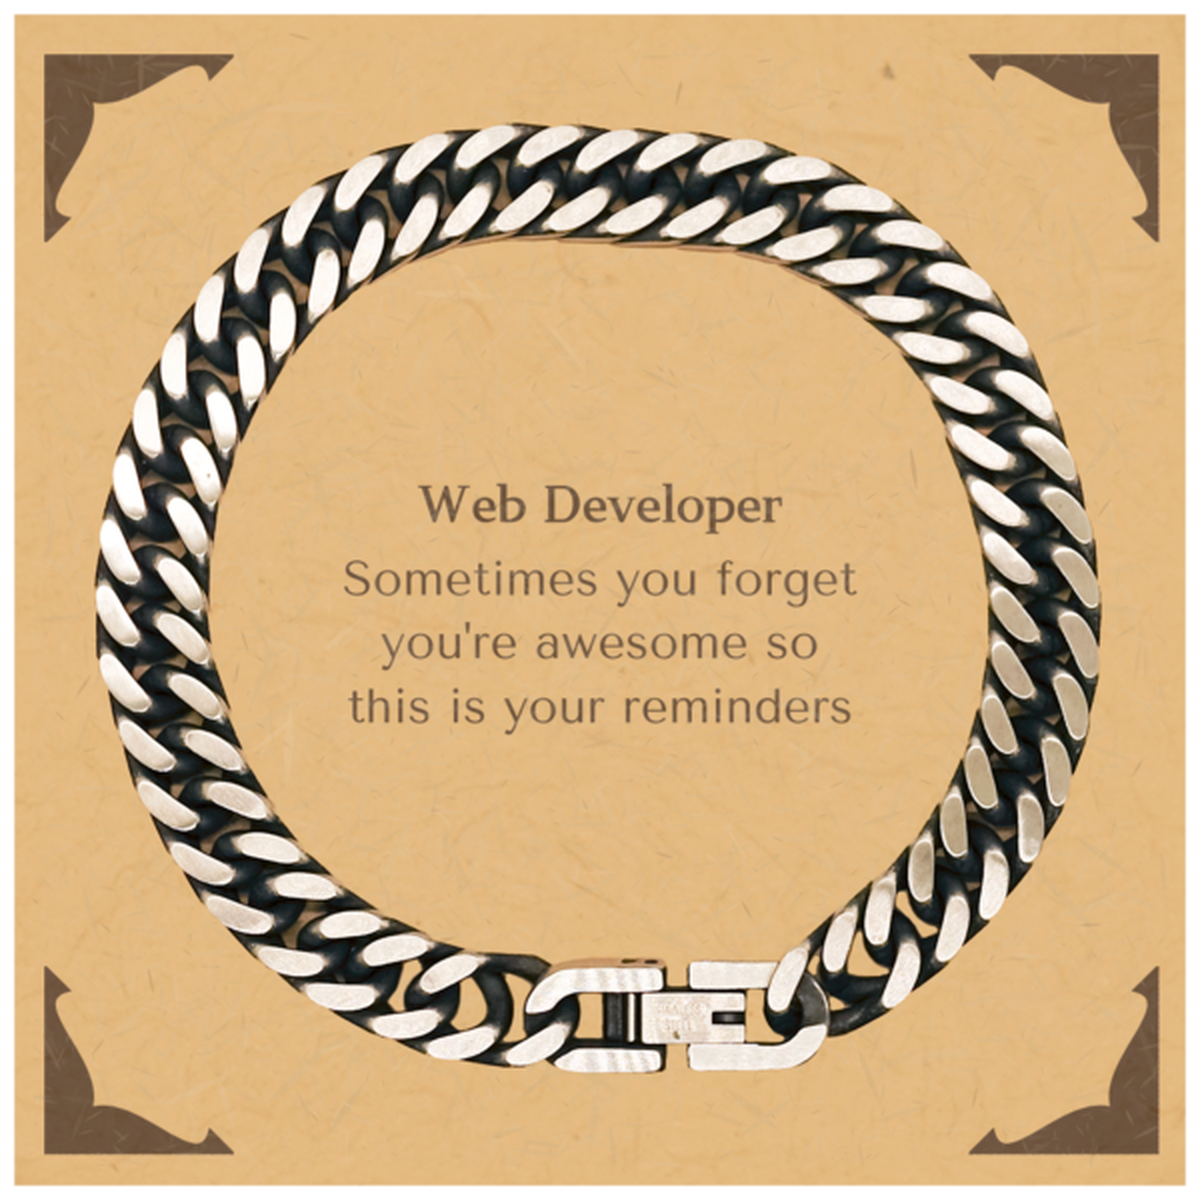 Sentimental Web Developer Cuban Link Chain Bracelet, Web Developer Sometimes you forget you're awesome so this is your reminders, Graduation Christmas Birthday Gifts for Web Developer, Men, Women, Coworkers